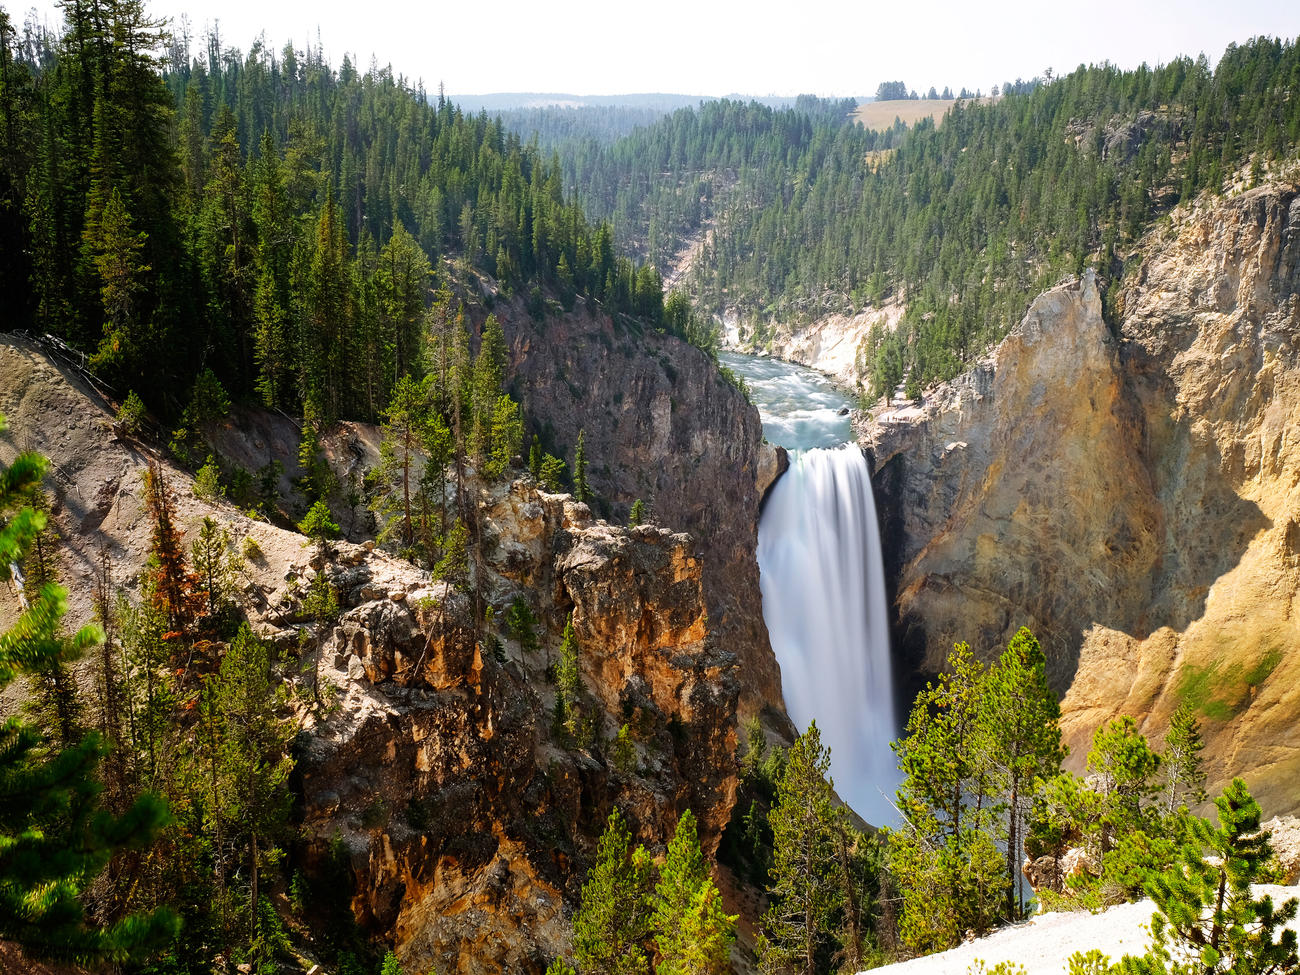 Waterfall at Yellowstone National Park off Highway 89